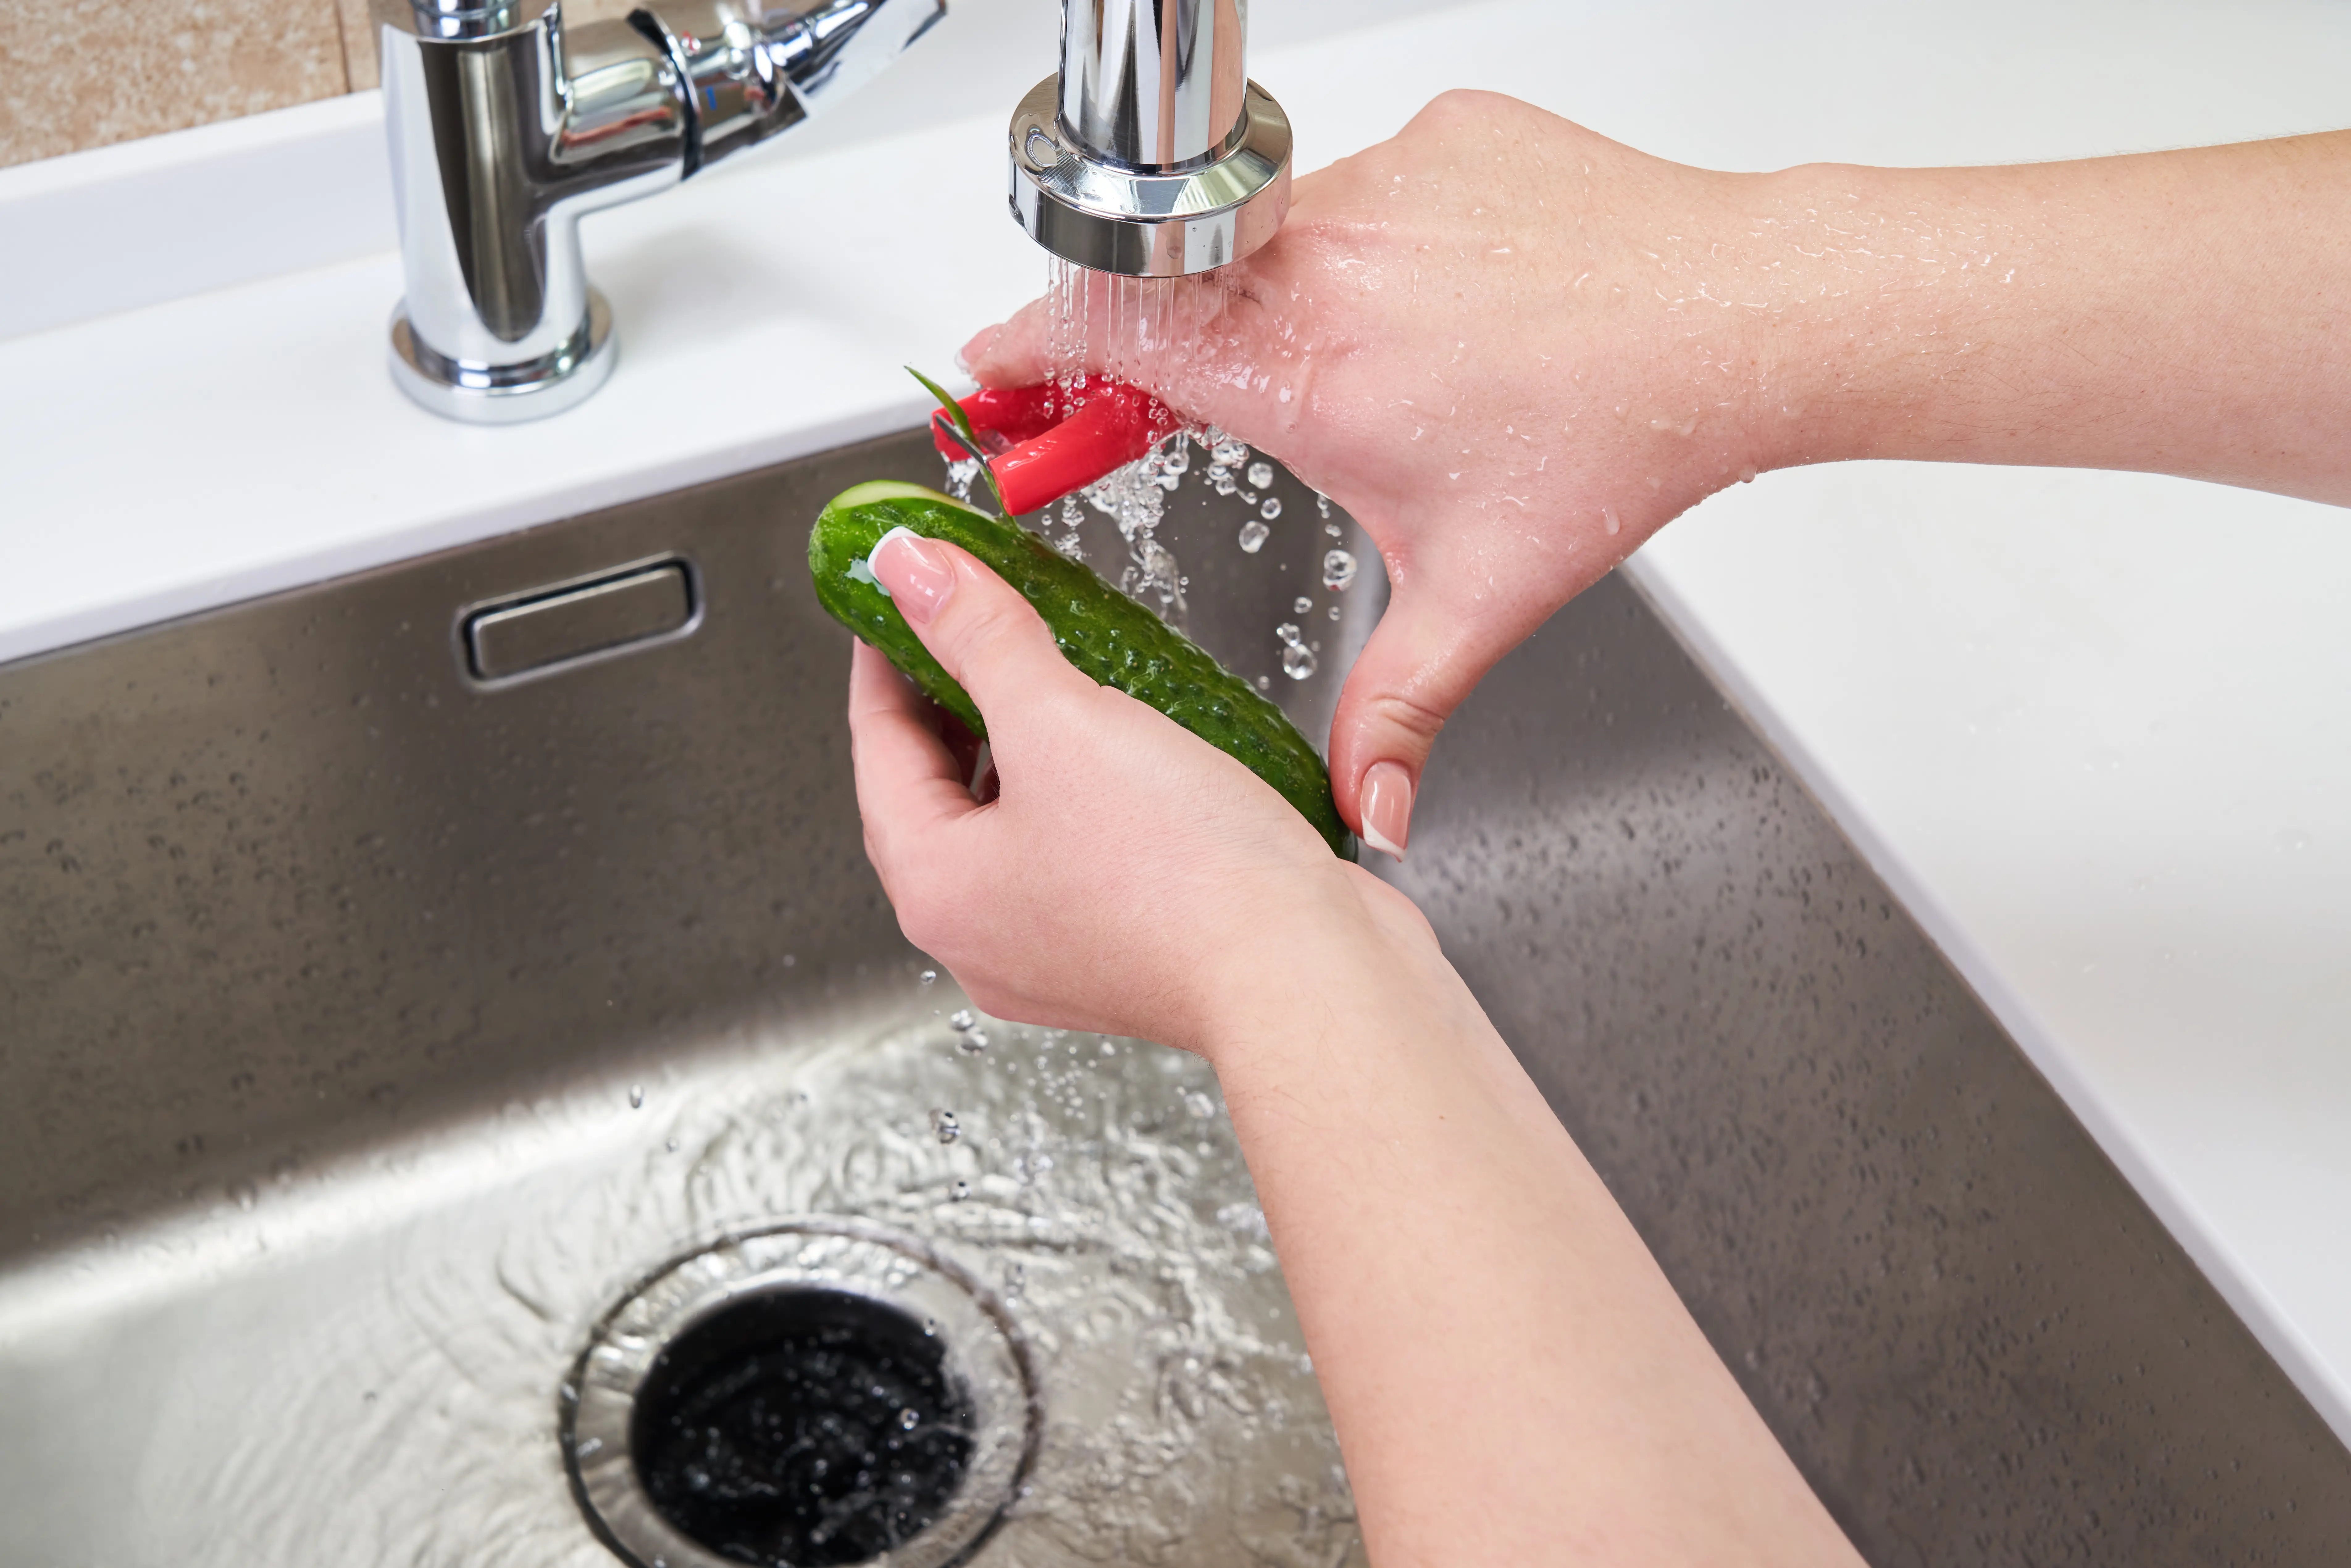 woman peeling a cucumber over a sink with a garbage disposal